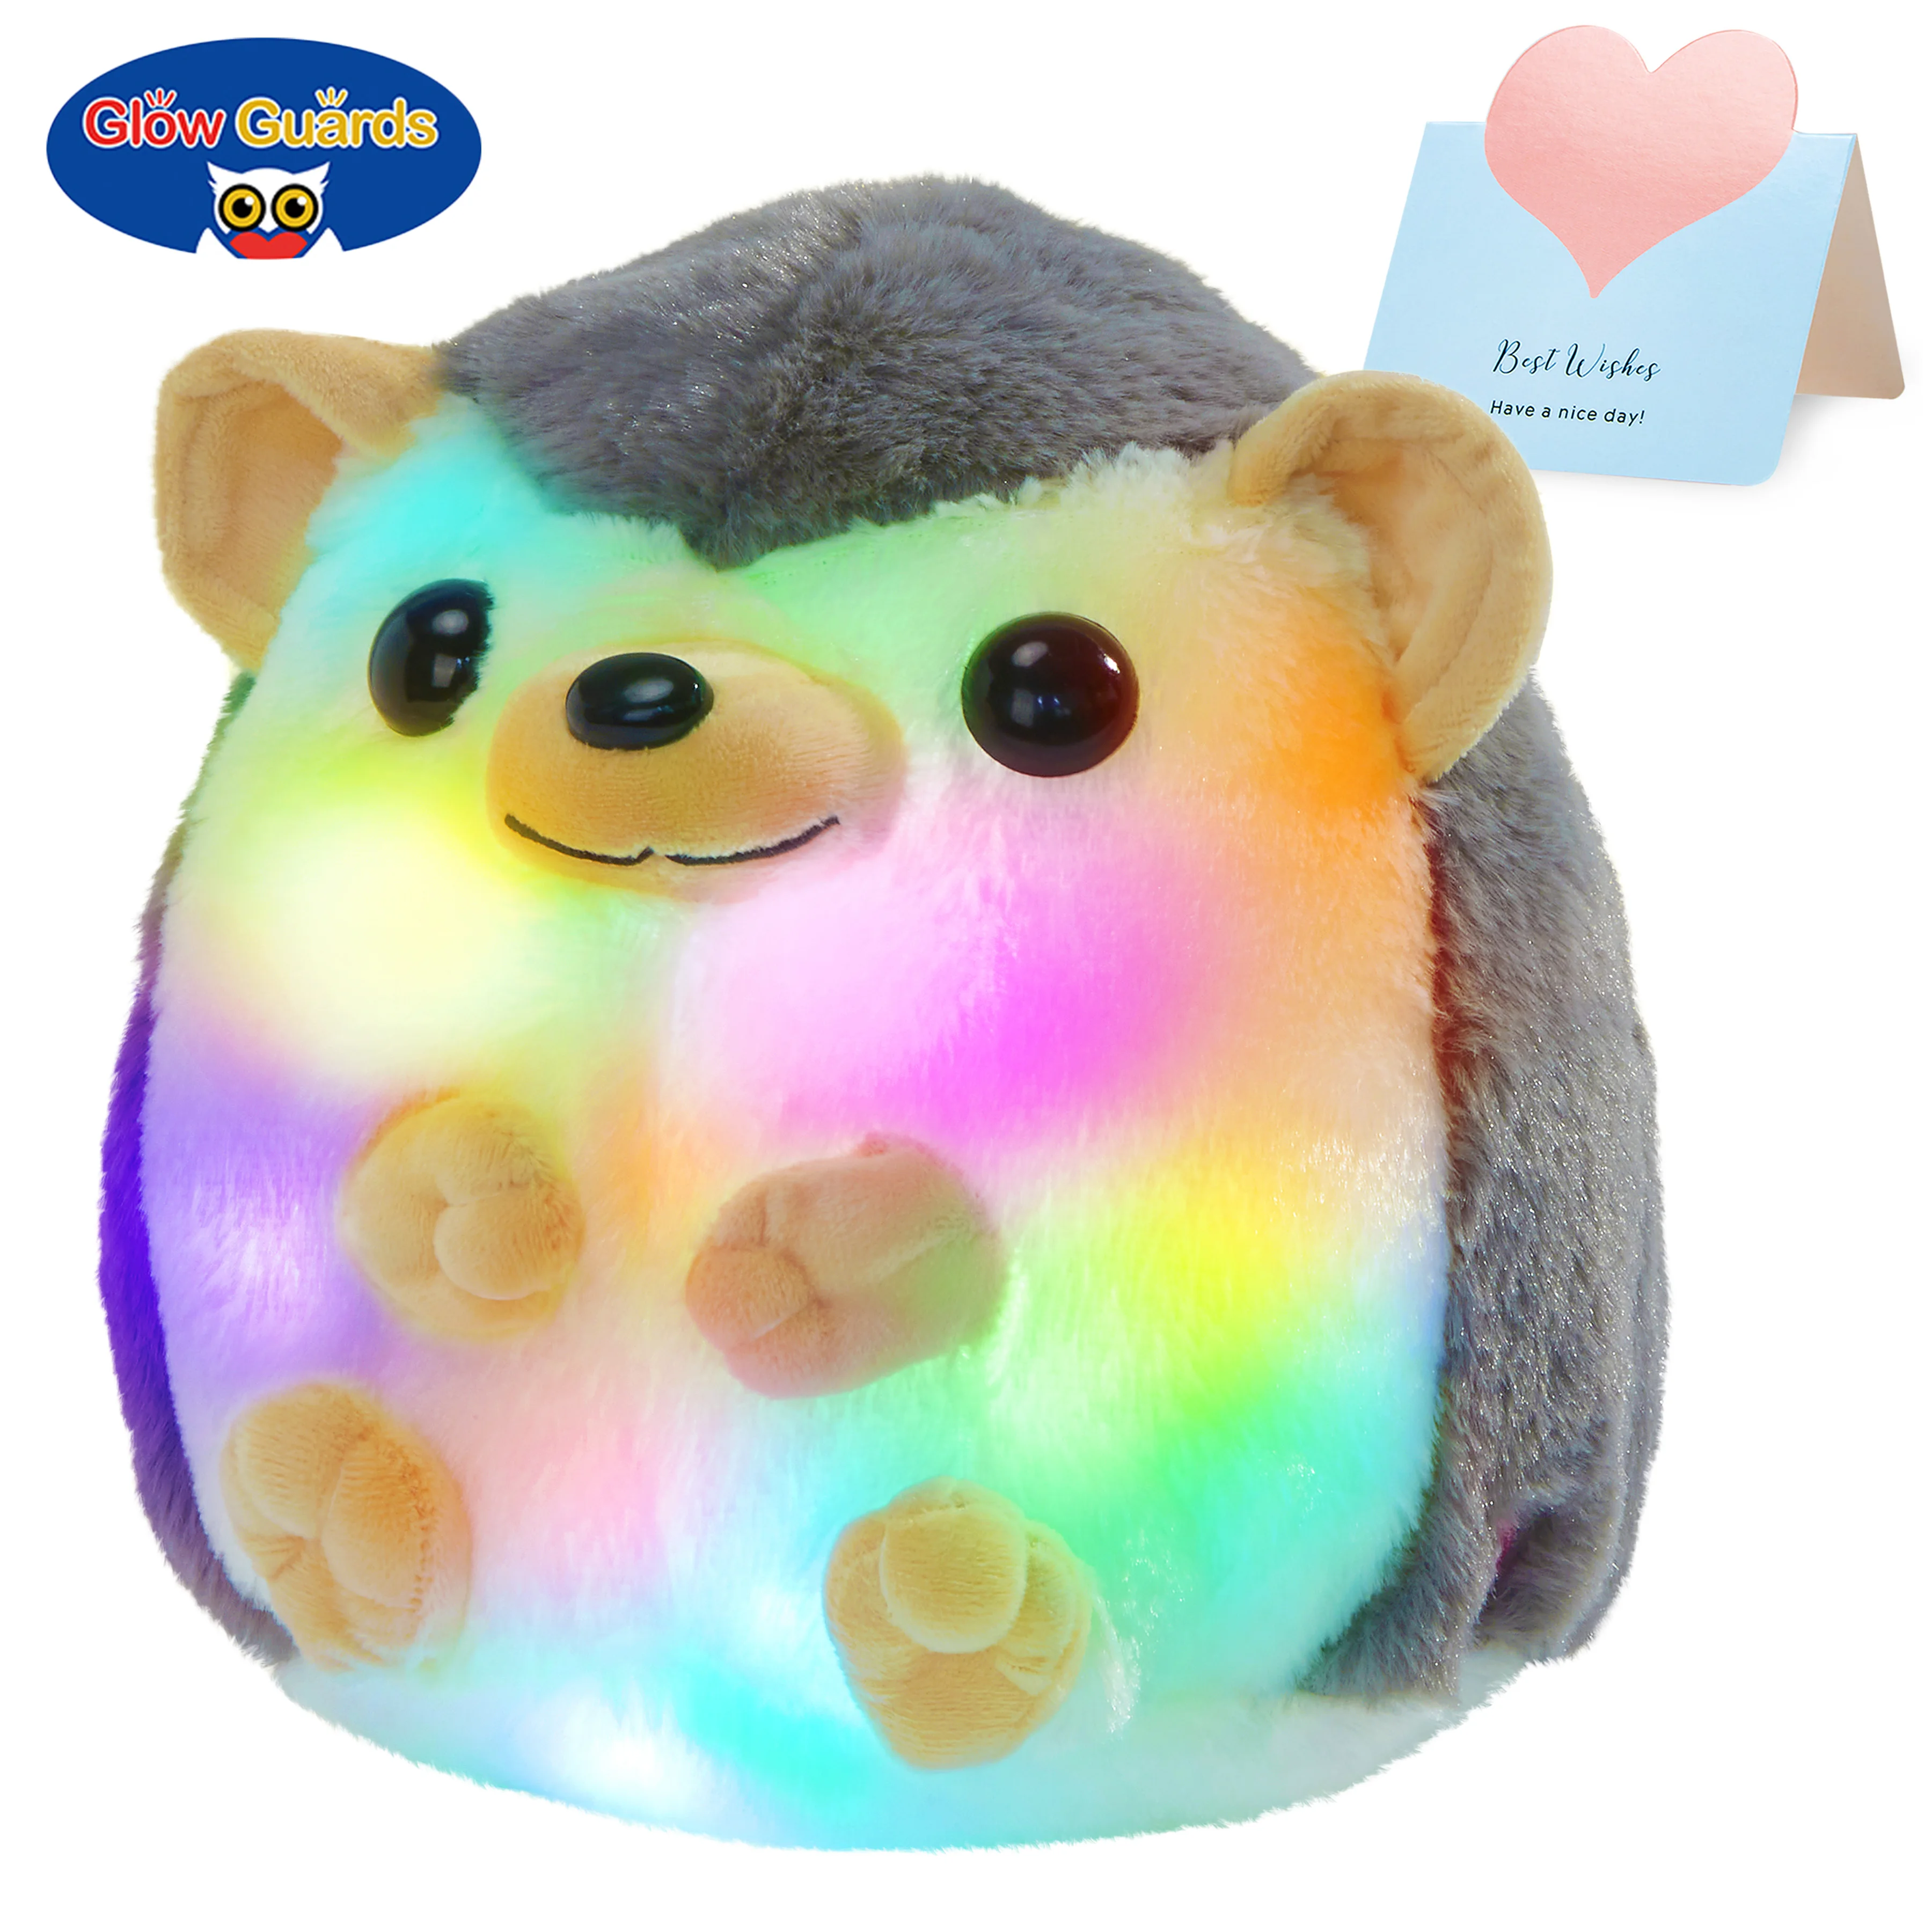 Glow Guards Cute Hedgehog Plush Toy Led Luminous Children's Throw Pillow Cotton Filled High Quality Soft Cushion for Kids Gift